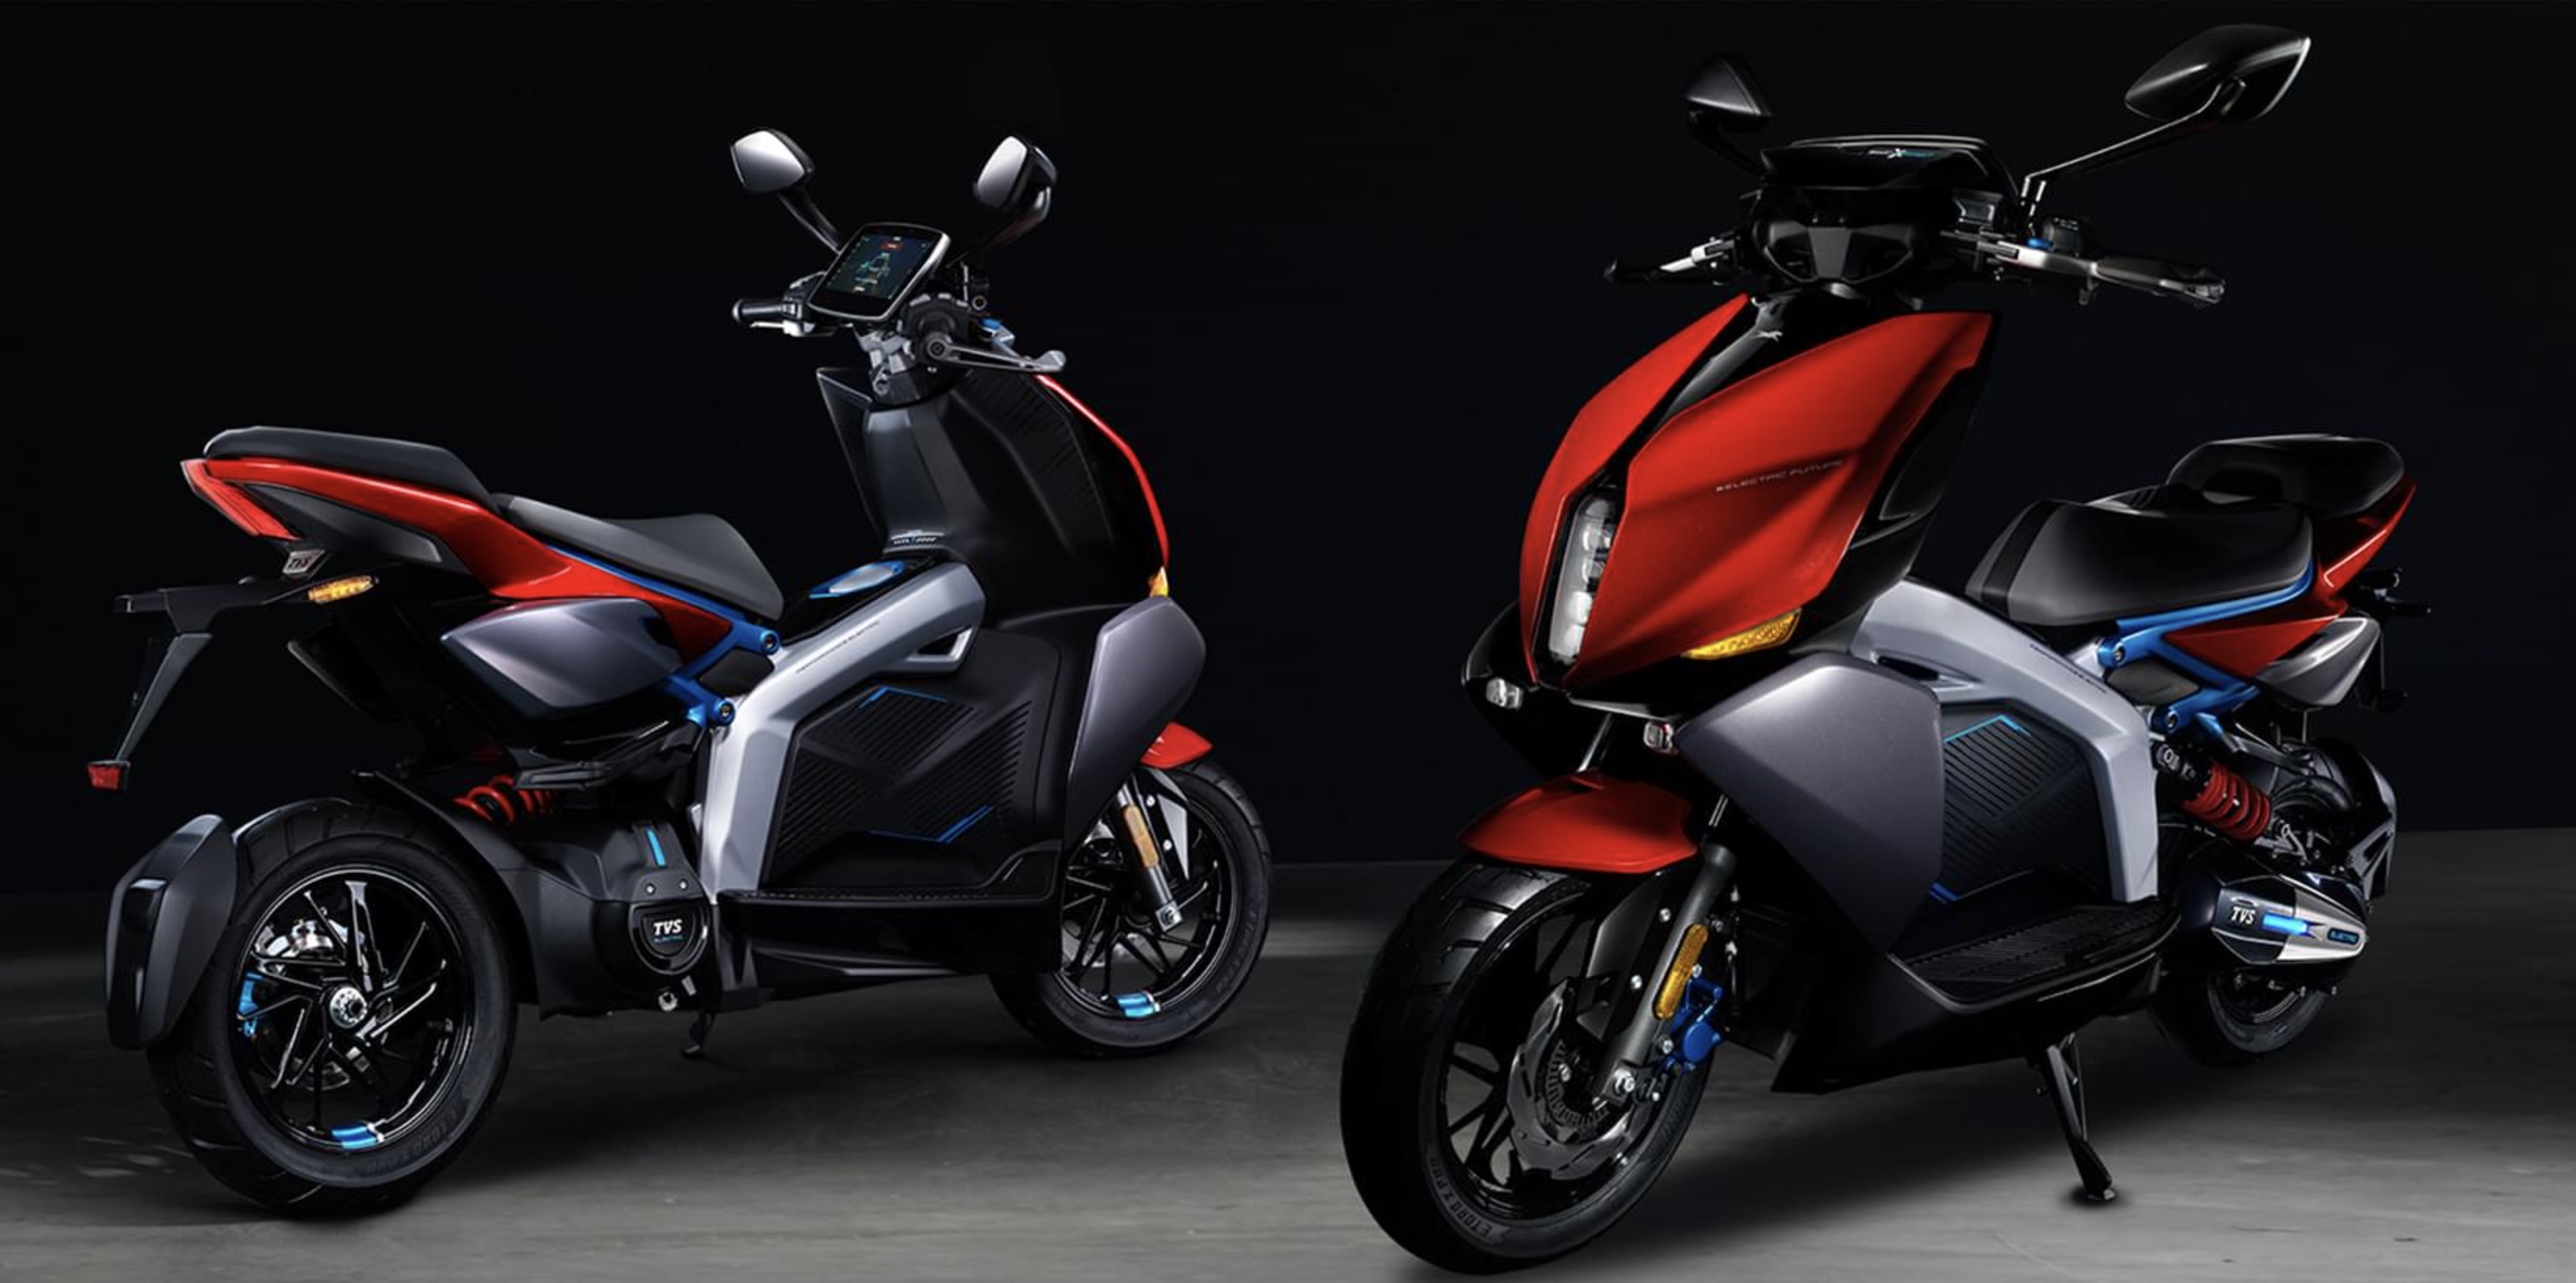 PHoto: TVS X Electric scooter launched in India at Rs. 2.49 lakh